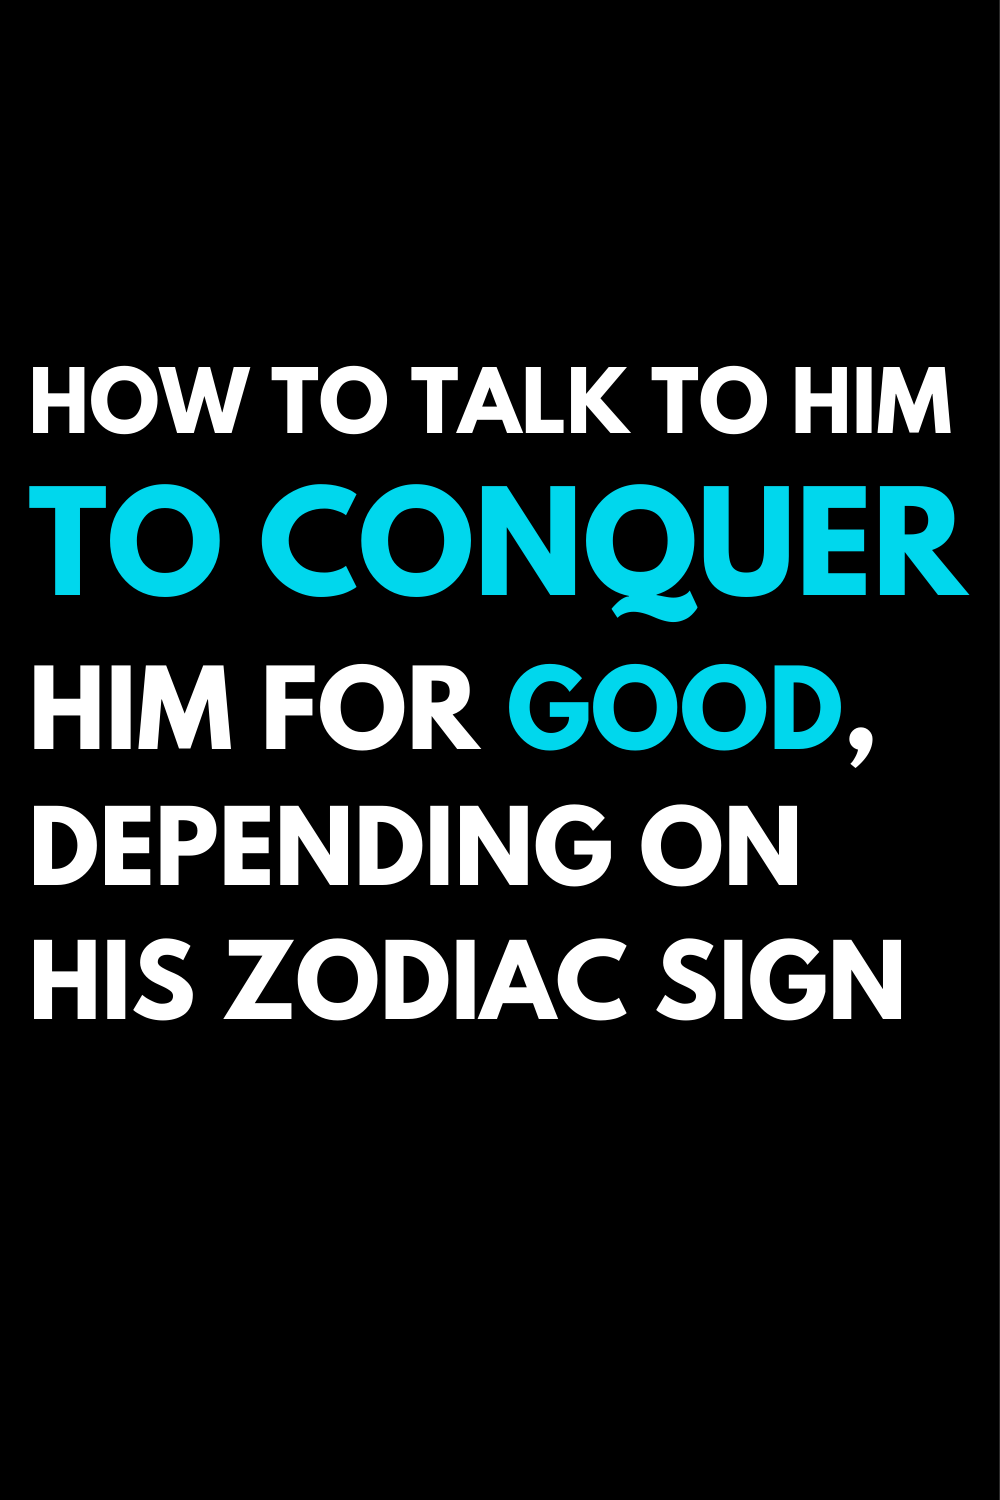 How to talk to him to conquer him for good, depending on his zodiac sign